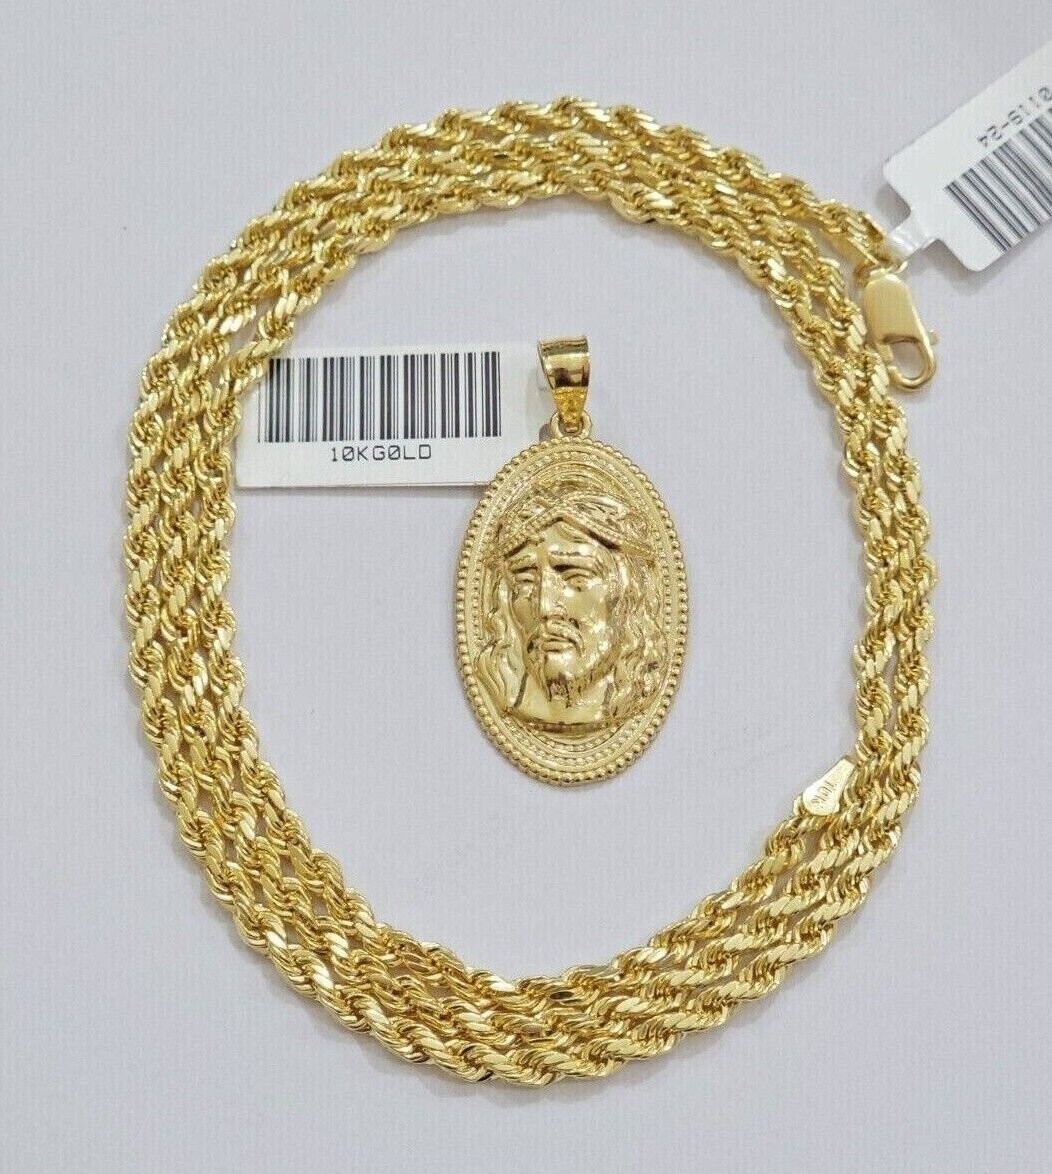 10k Gold Rope Chain Jesus Head Charm Pendant Set 22" Inch 3mm Necklace REAL SALE